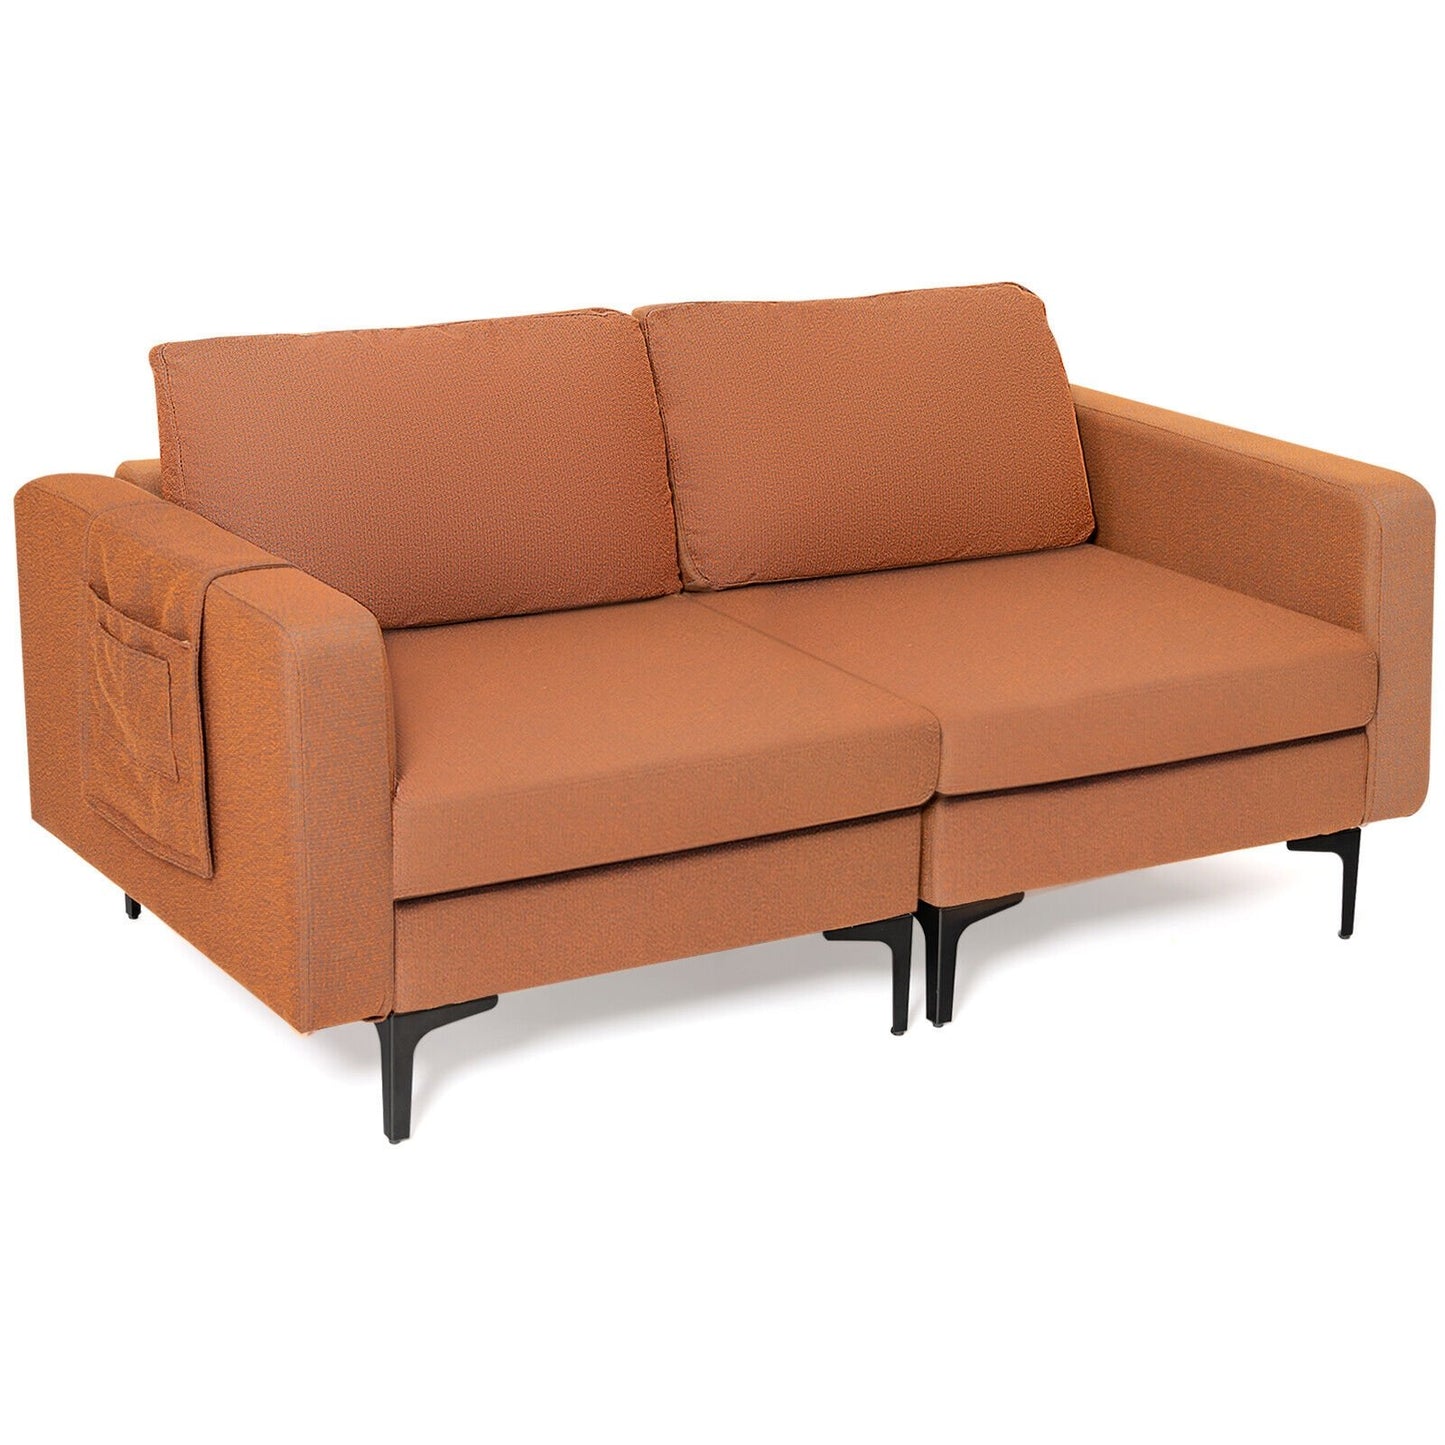 Modern Loveseat Sofa Couch with Side Storage Pocket and Sponged Padded Seat Cushions, Orange